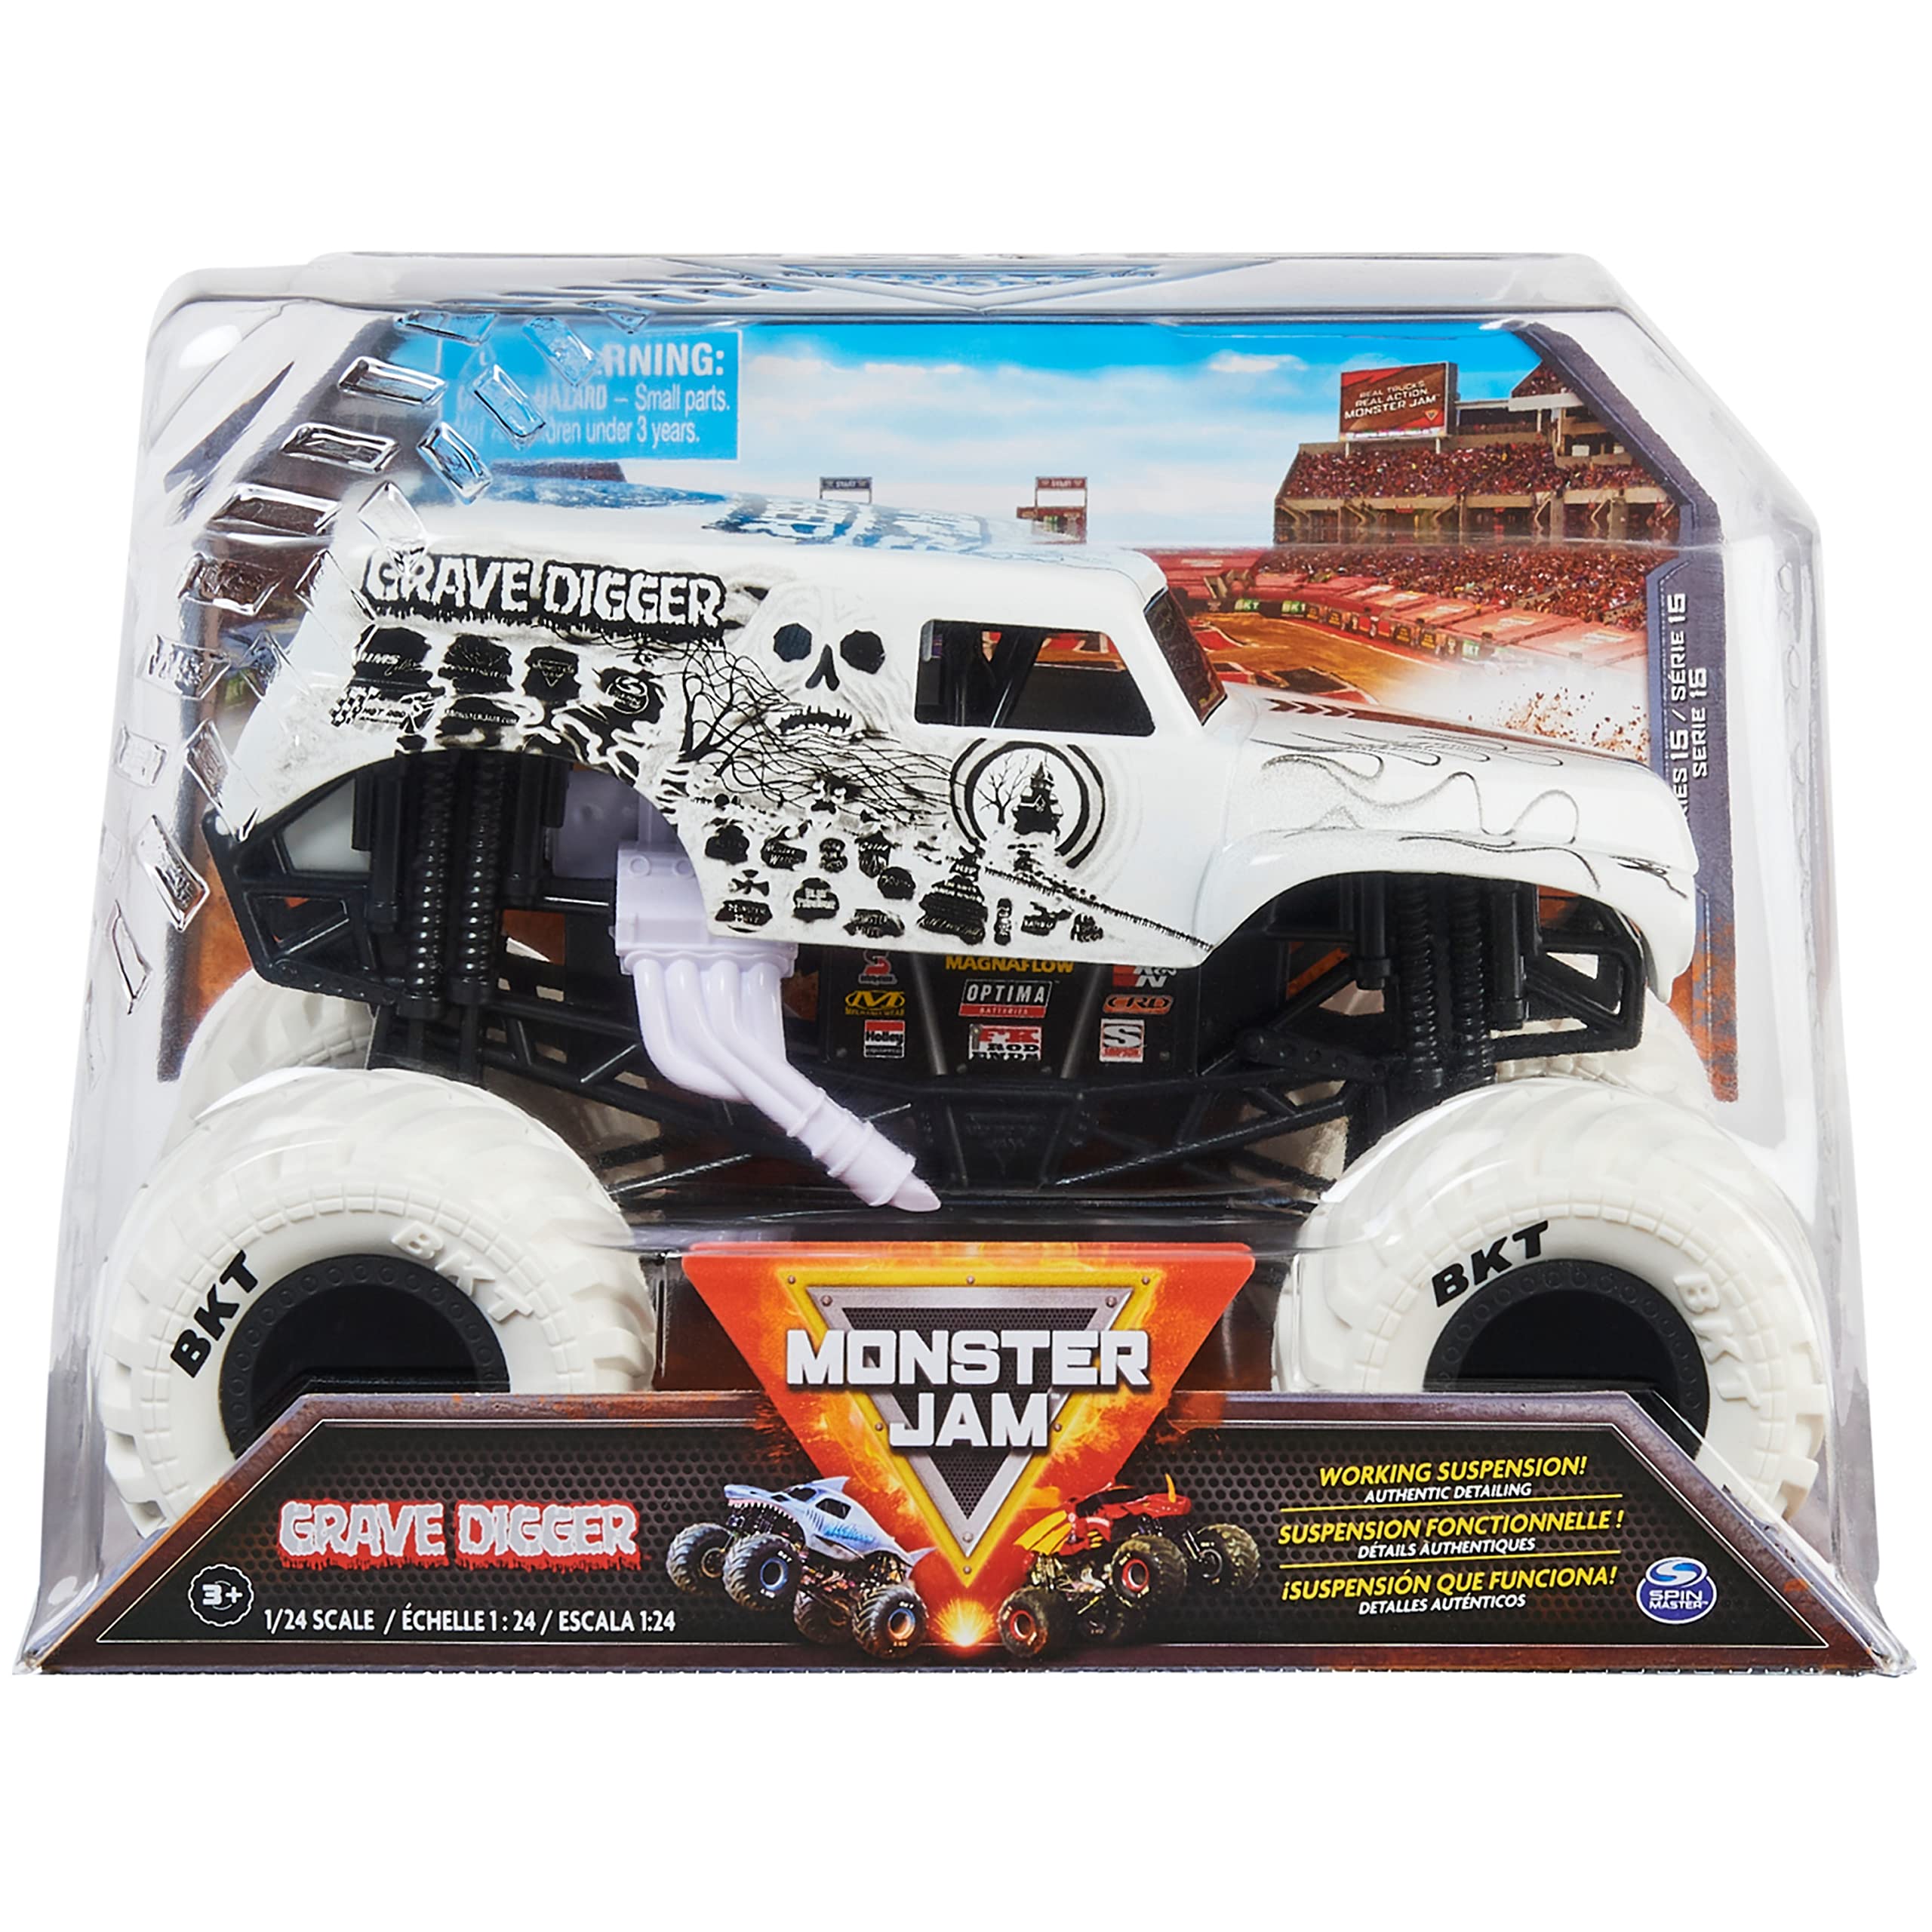 Monster Jam, Official Dragon Monster Truck, Die-Cast Vehicle, 1:24 Scale